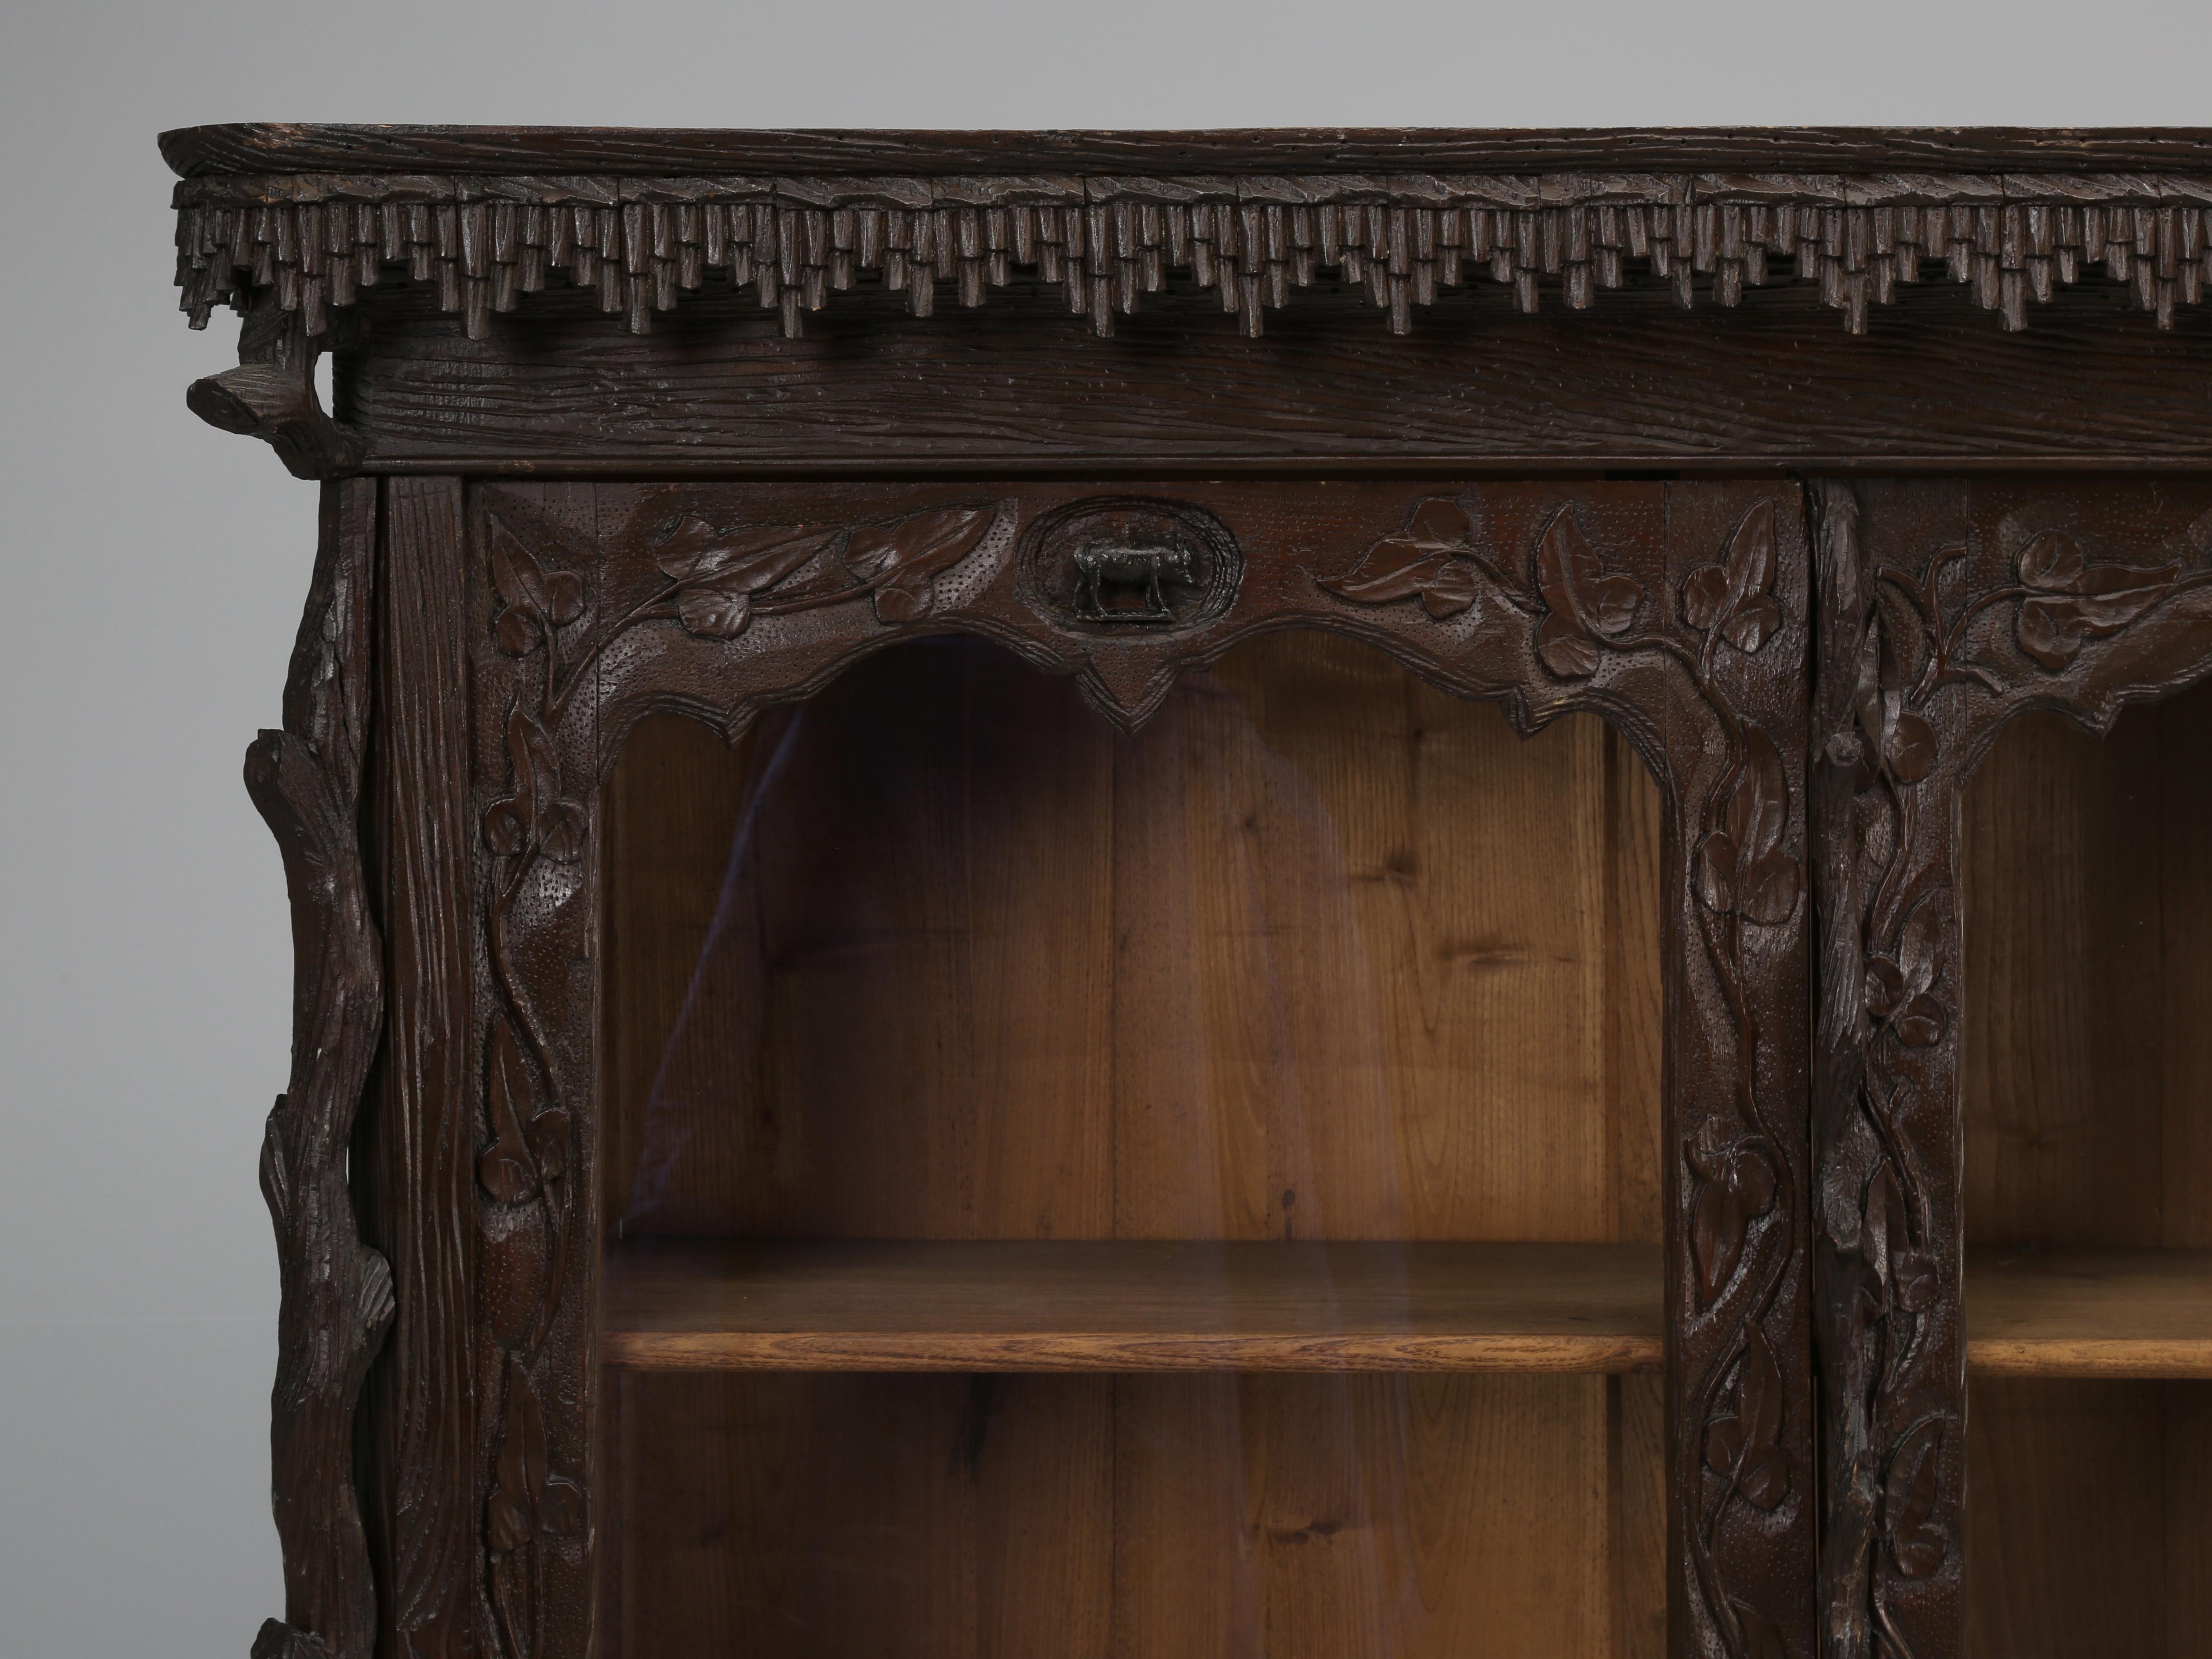 Matched pair of Black Forest bookcases, that were part of a major collection of Black Forest items sold by a Chateau outside or Marseille, France. There were (42) antique Black Forest items in the chateau and we were fortunate enough to purchase the